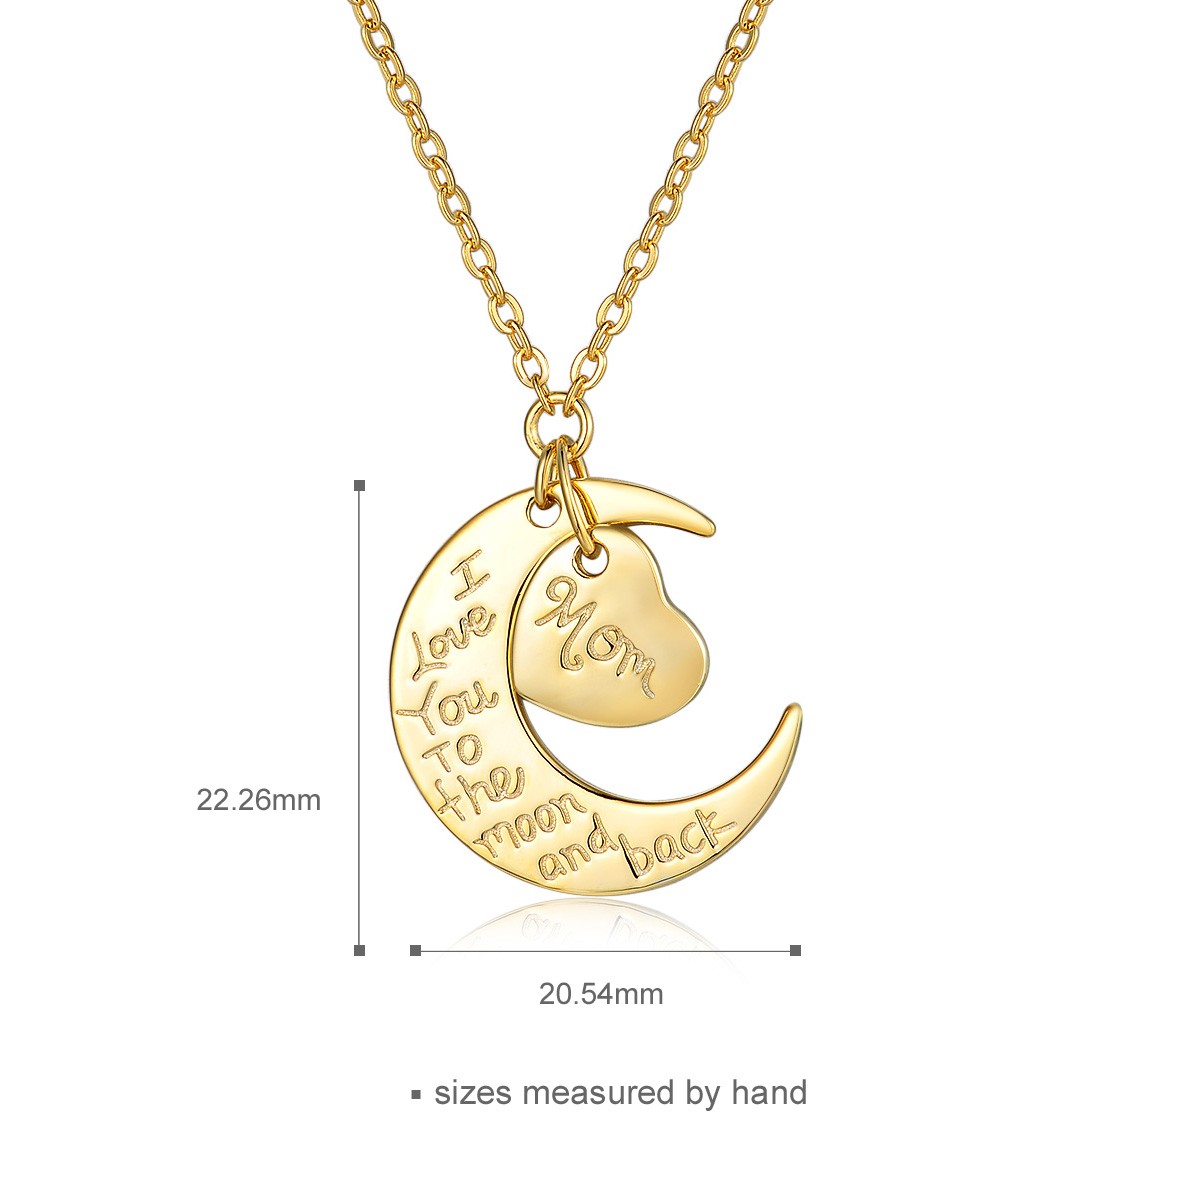 OEM high quality 925 sterling silver gold plated necklace pendant for women presonalzied  jewelry